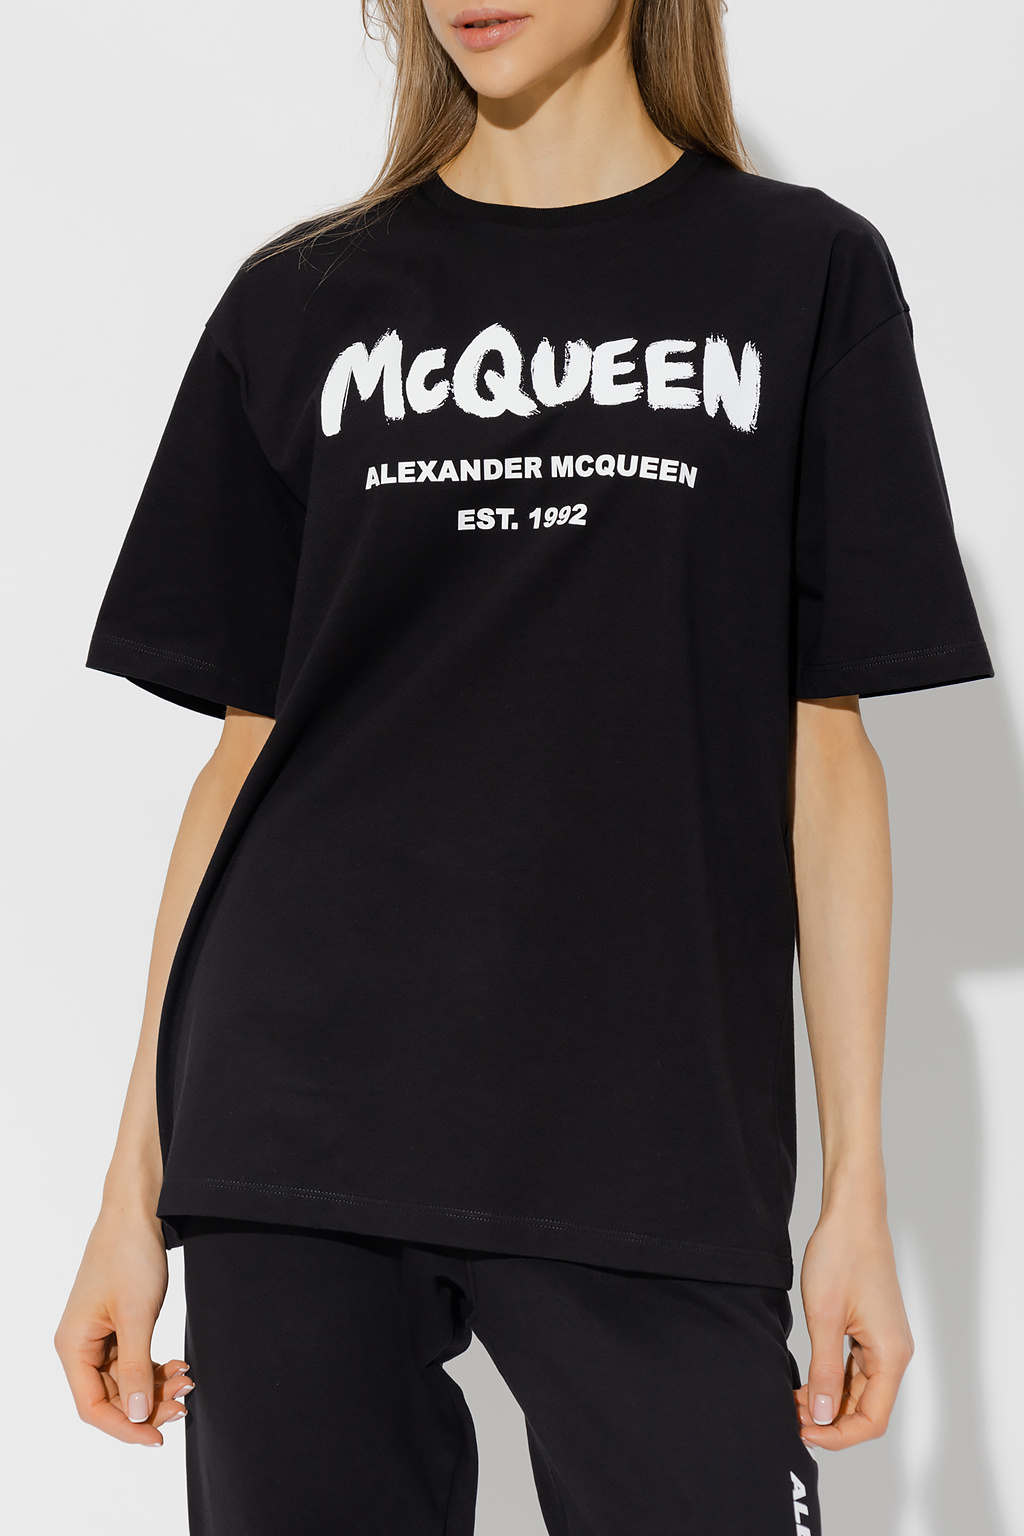 Alexander McQueen Alexander Mcqueen's Scarf Is An Encounter Of Finesse And Duskiness